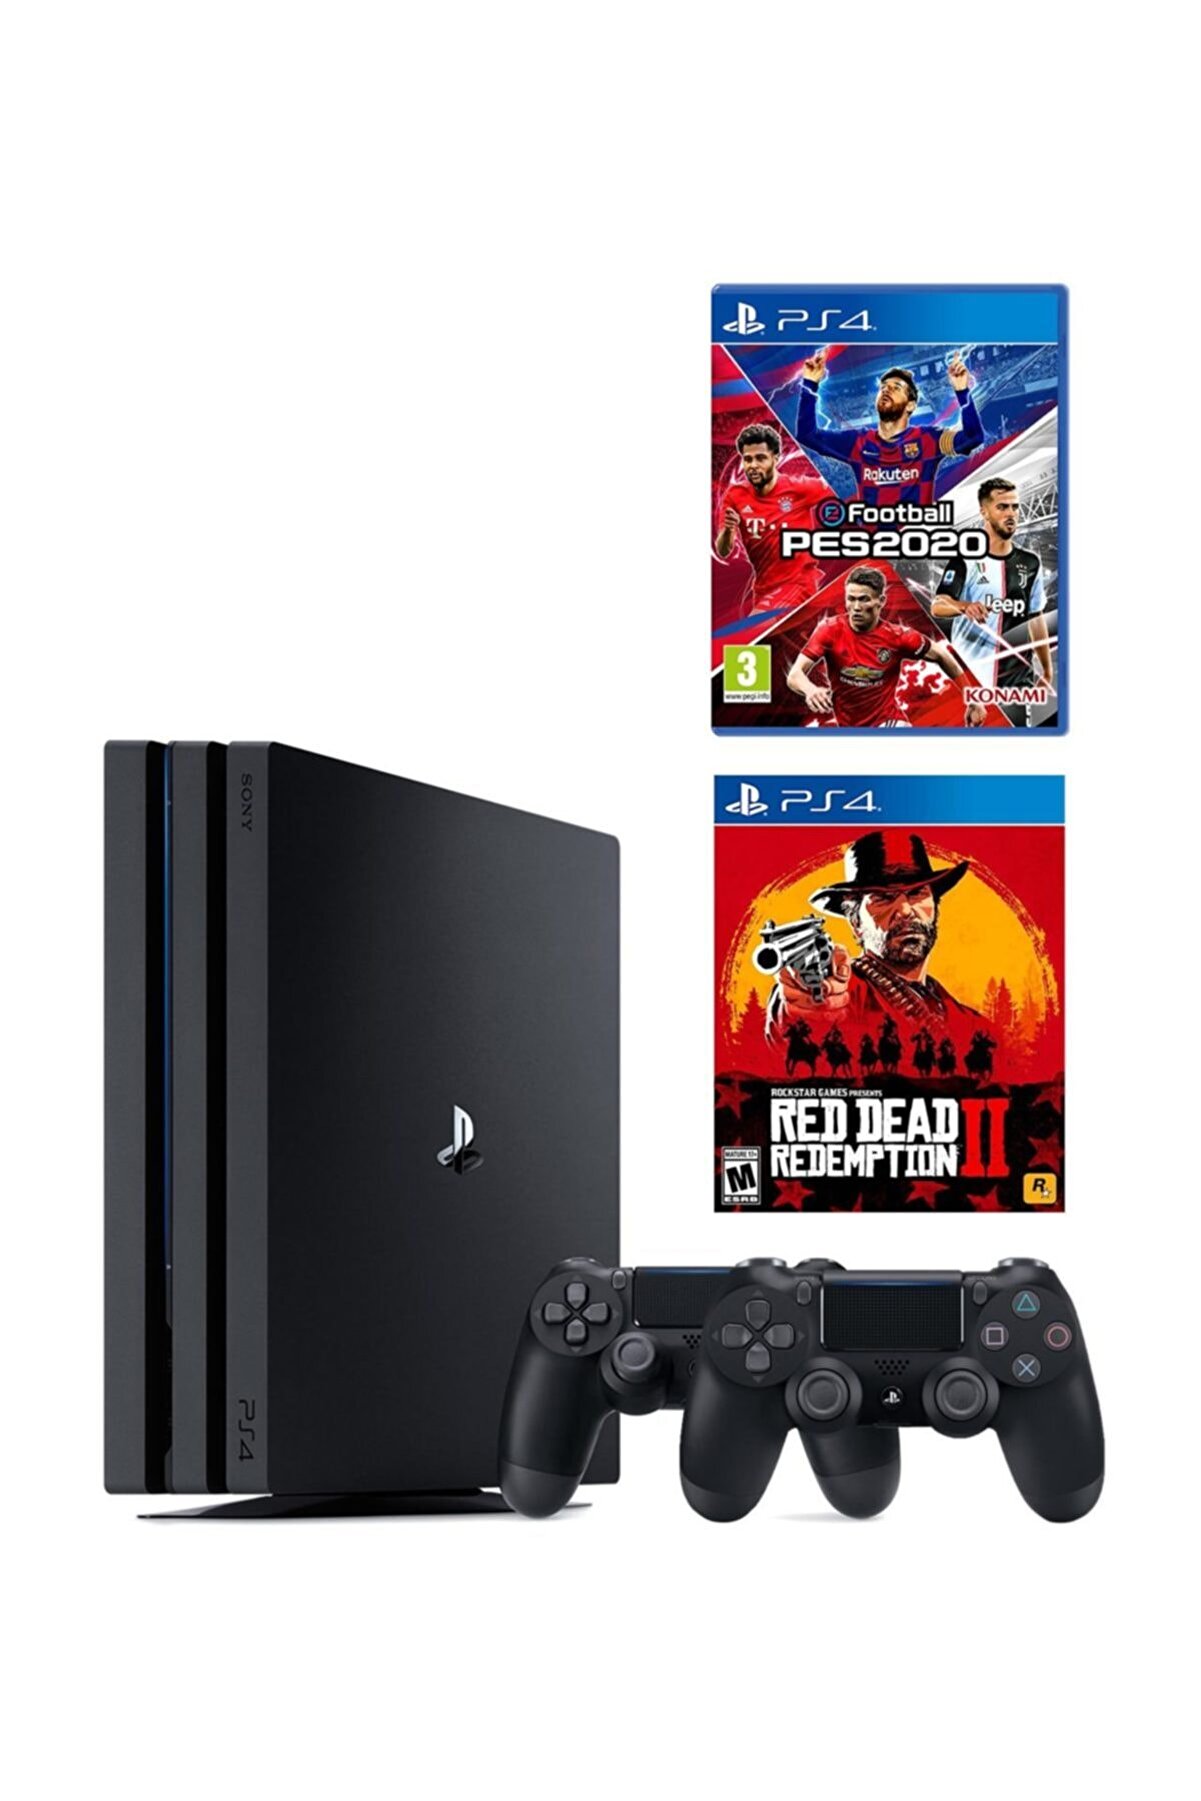 Sony Playstation 4 Pro 1 Tb + 2. Ps4 Kol + Ps4 Pes 2020 + Ps4 Red Dead Redemption 2